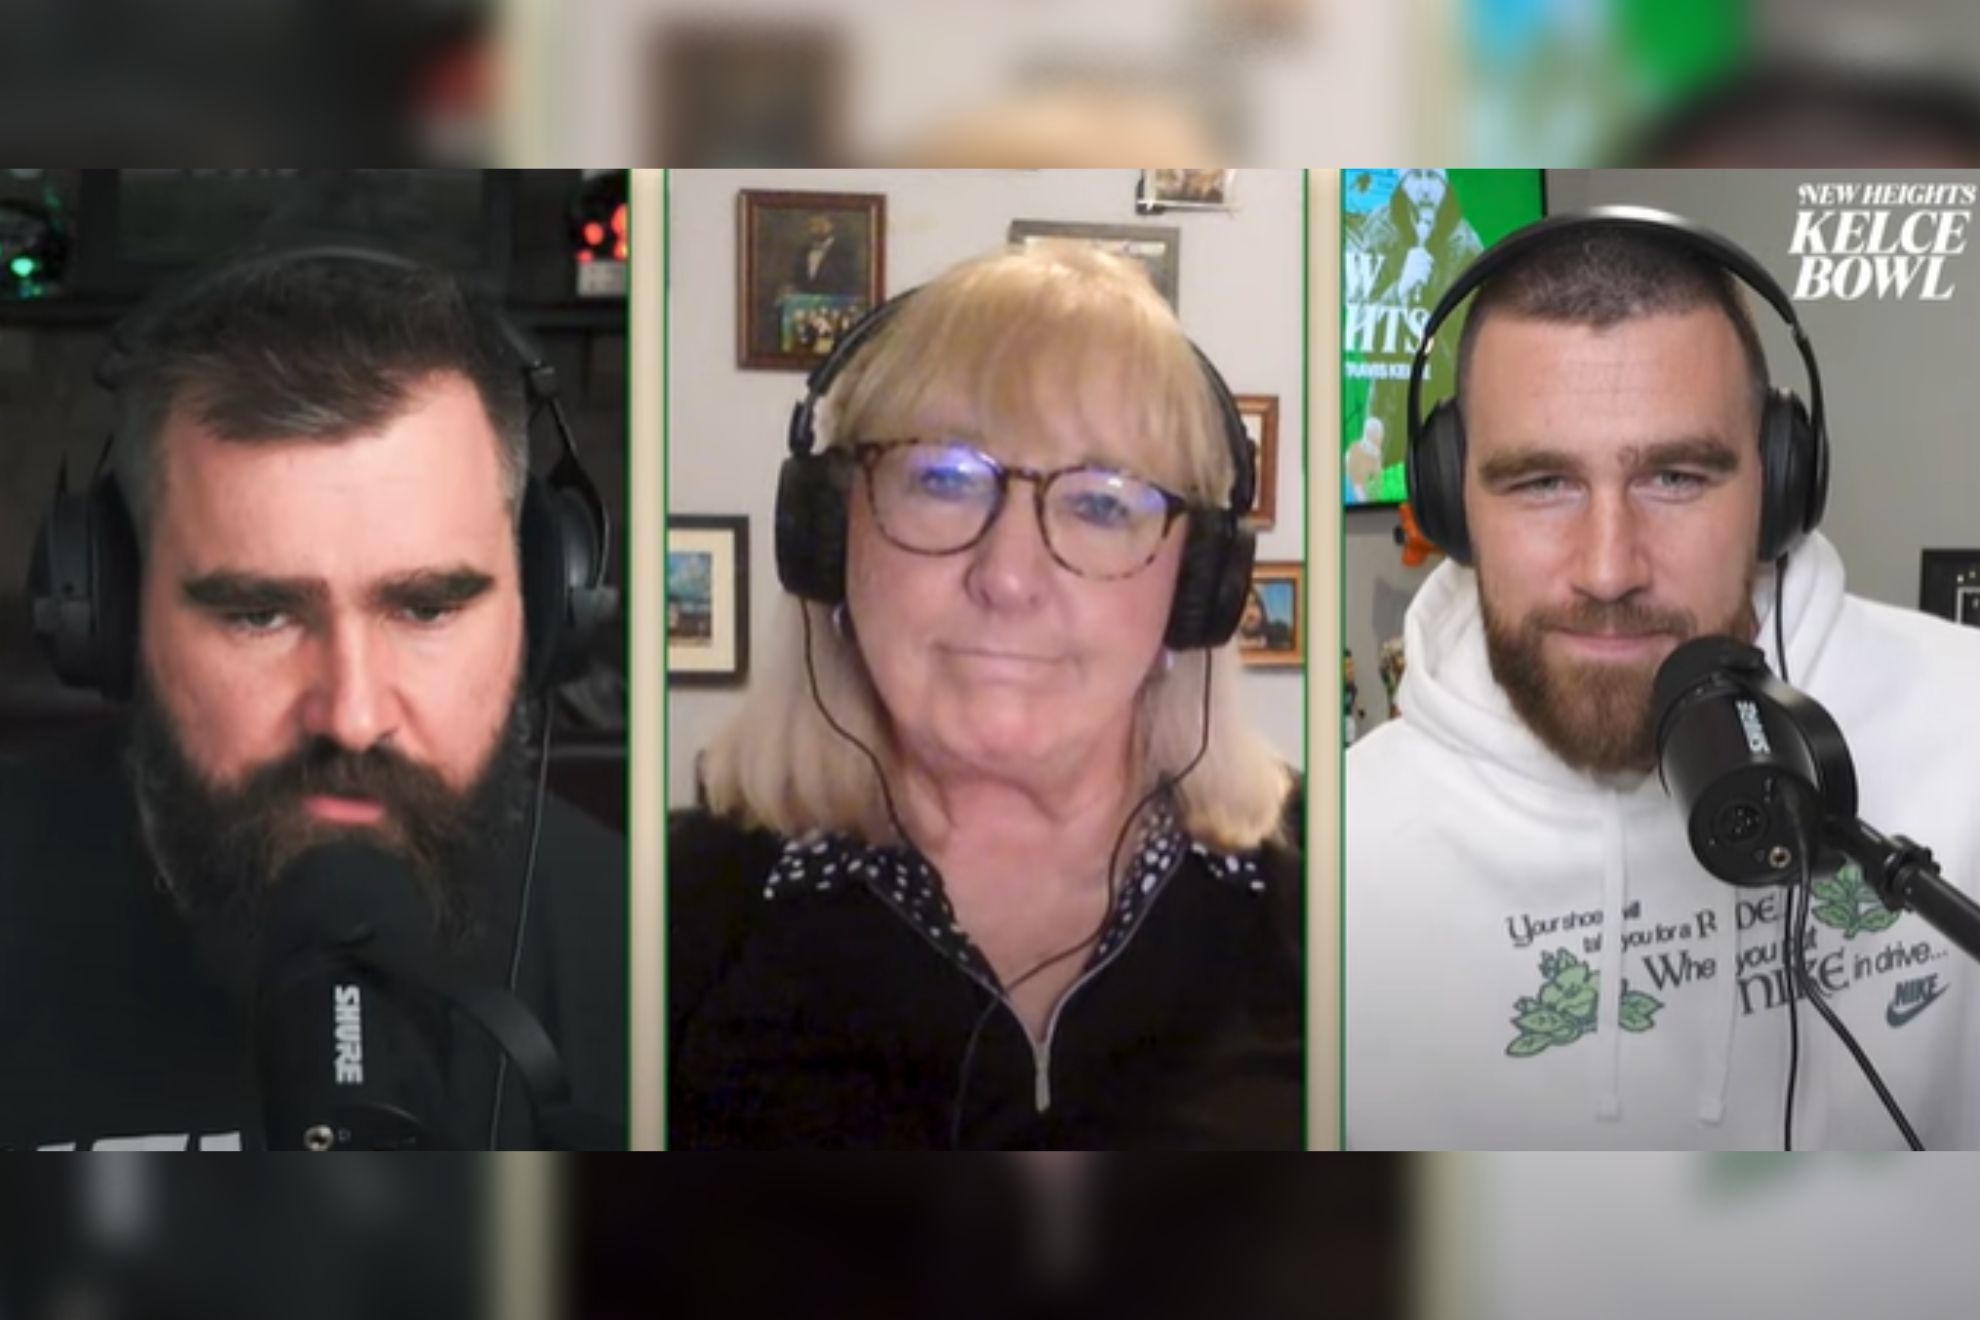 Travis and Jason Kelce interview parents on new episode of New Heights